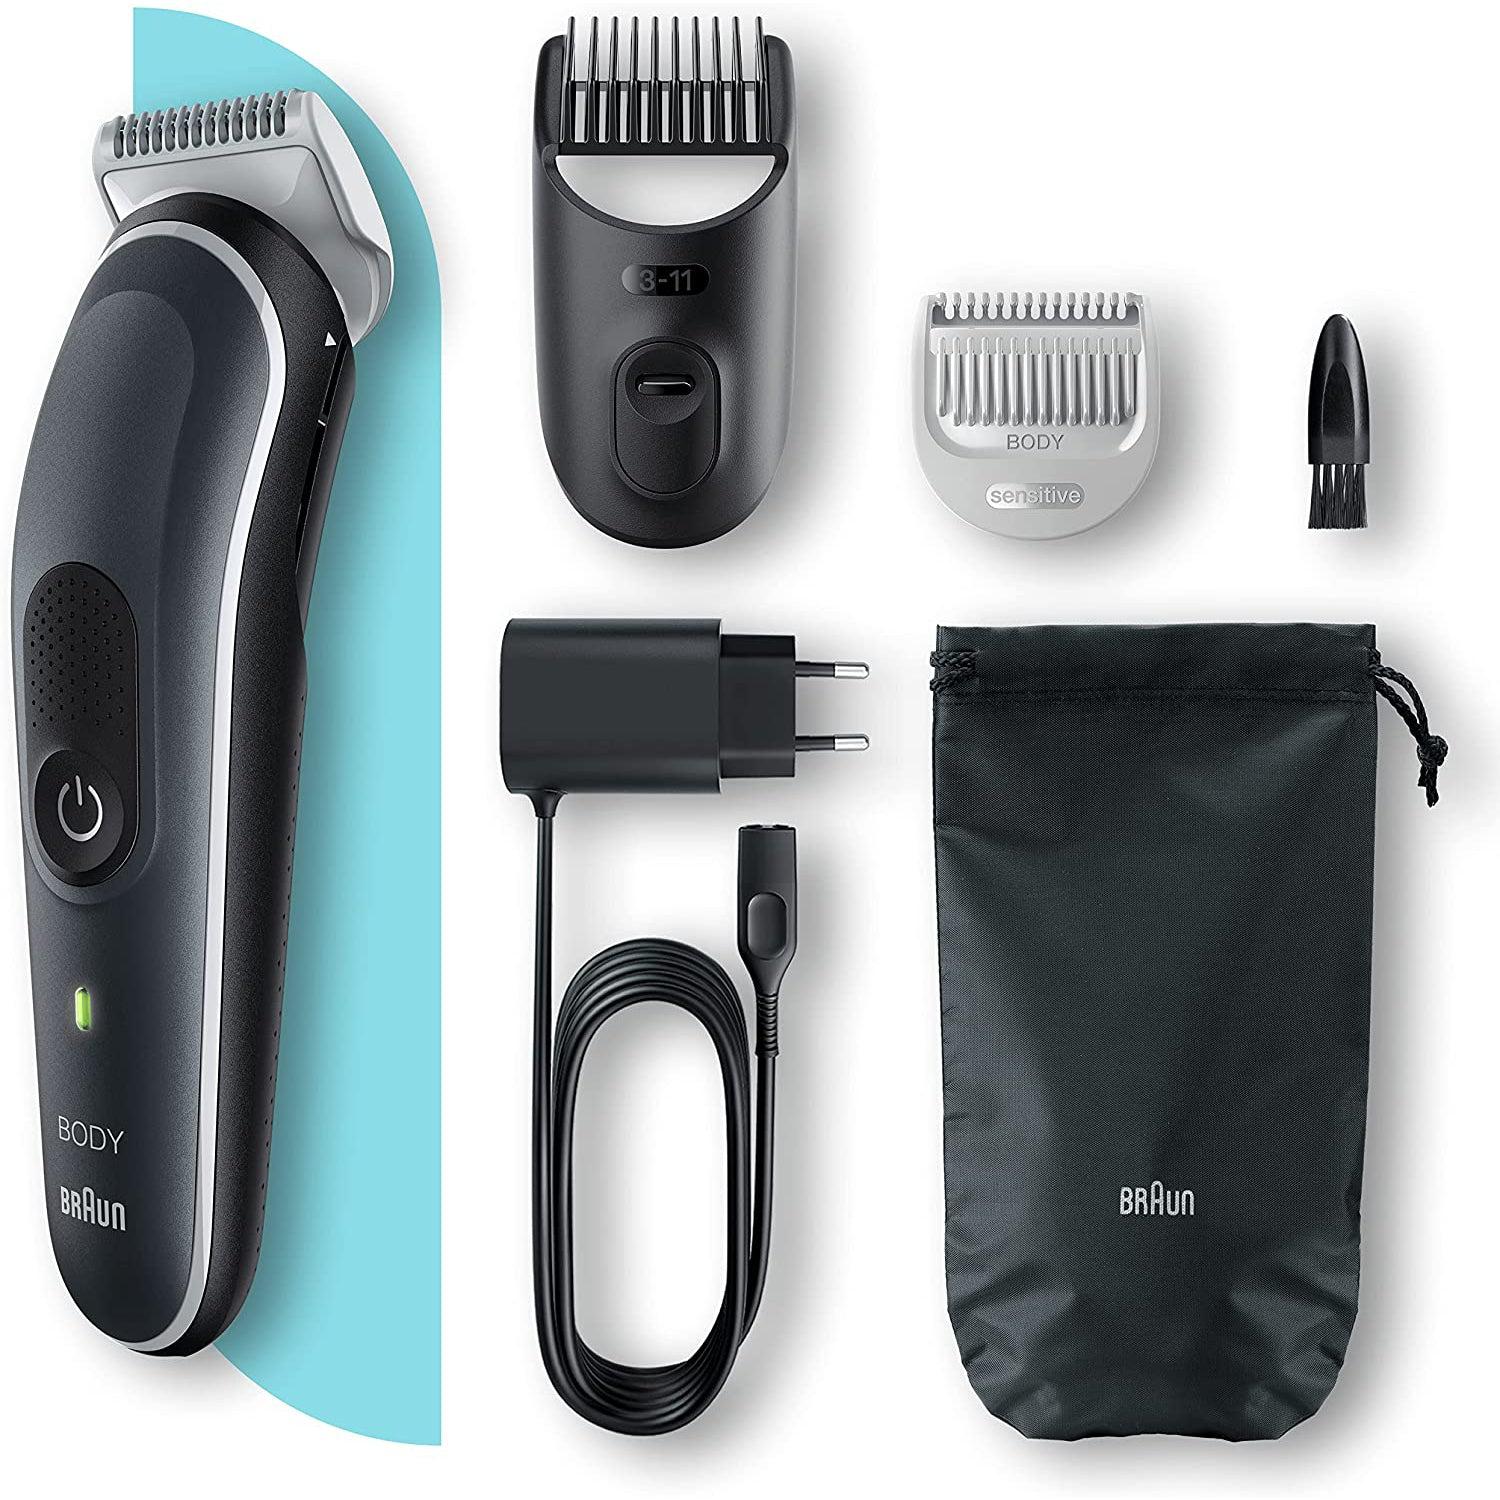 Braun BG5350 Body Groomer 5, Manscape Tool for Men With SkinShield Technology, Sensitive Comb, Wet & Dry, 100% Waterproof - Healthxpress.ie